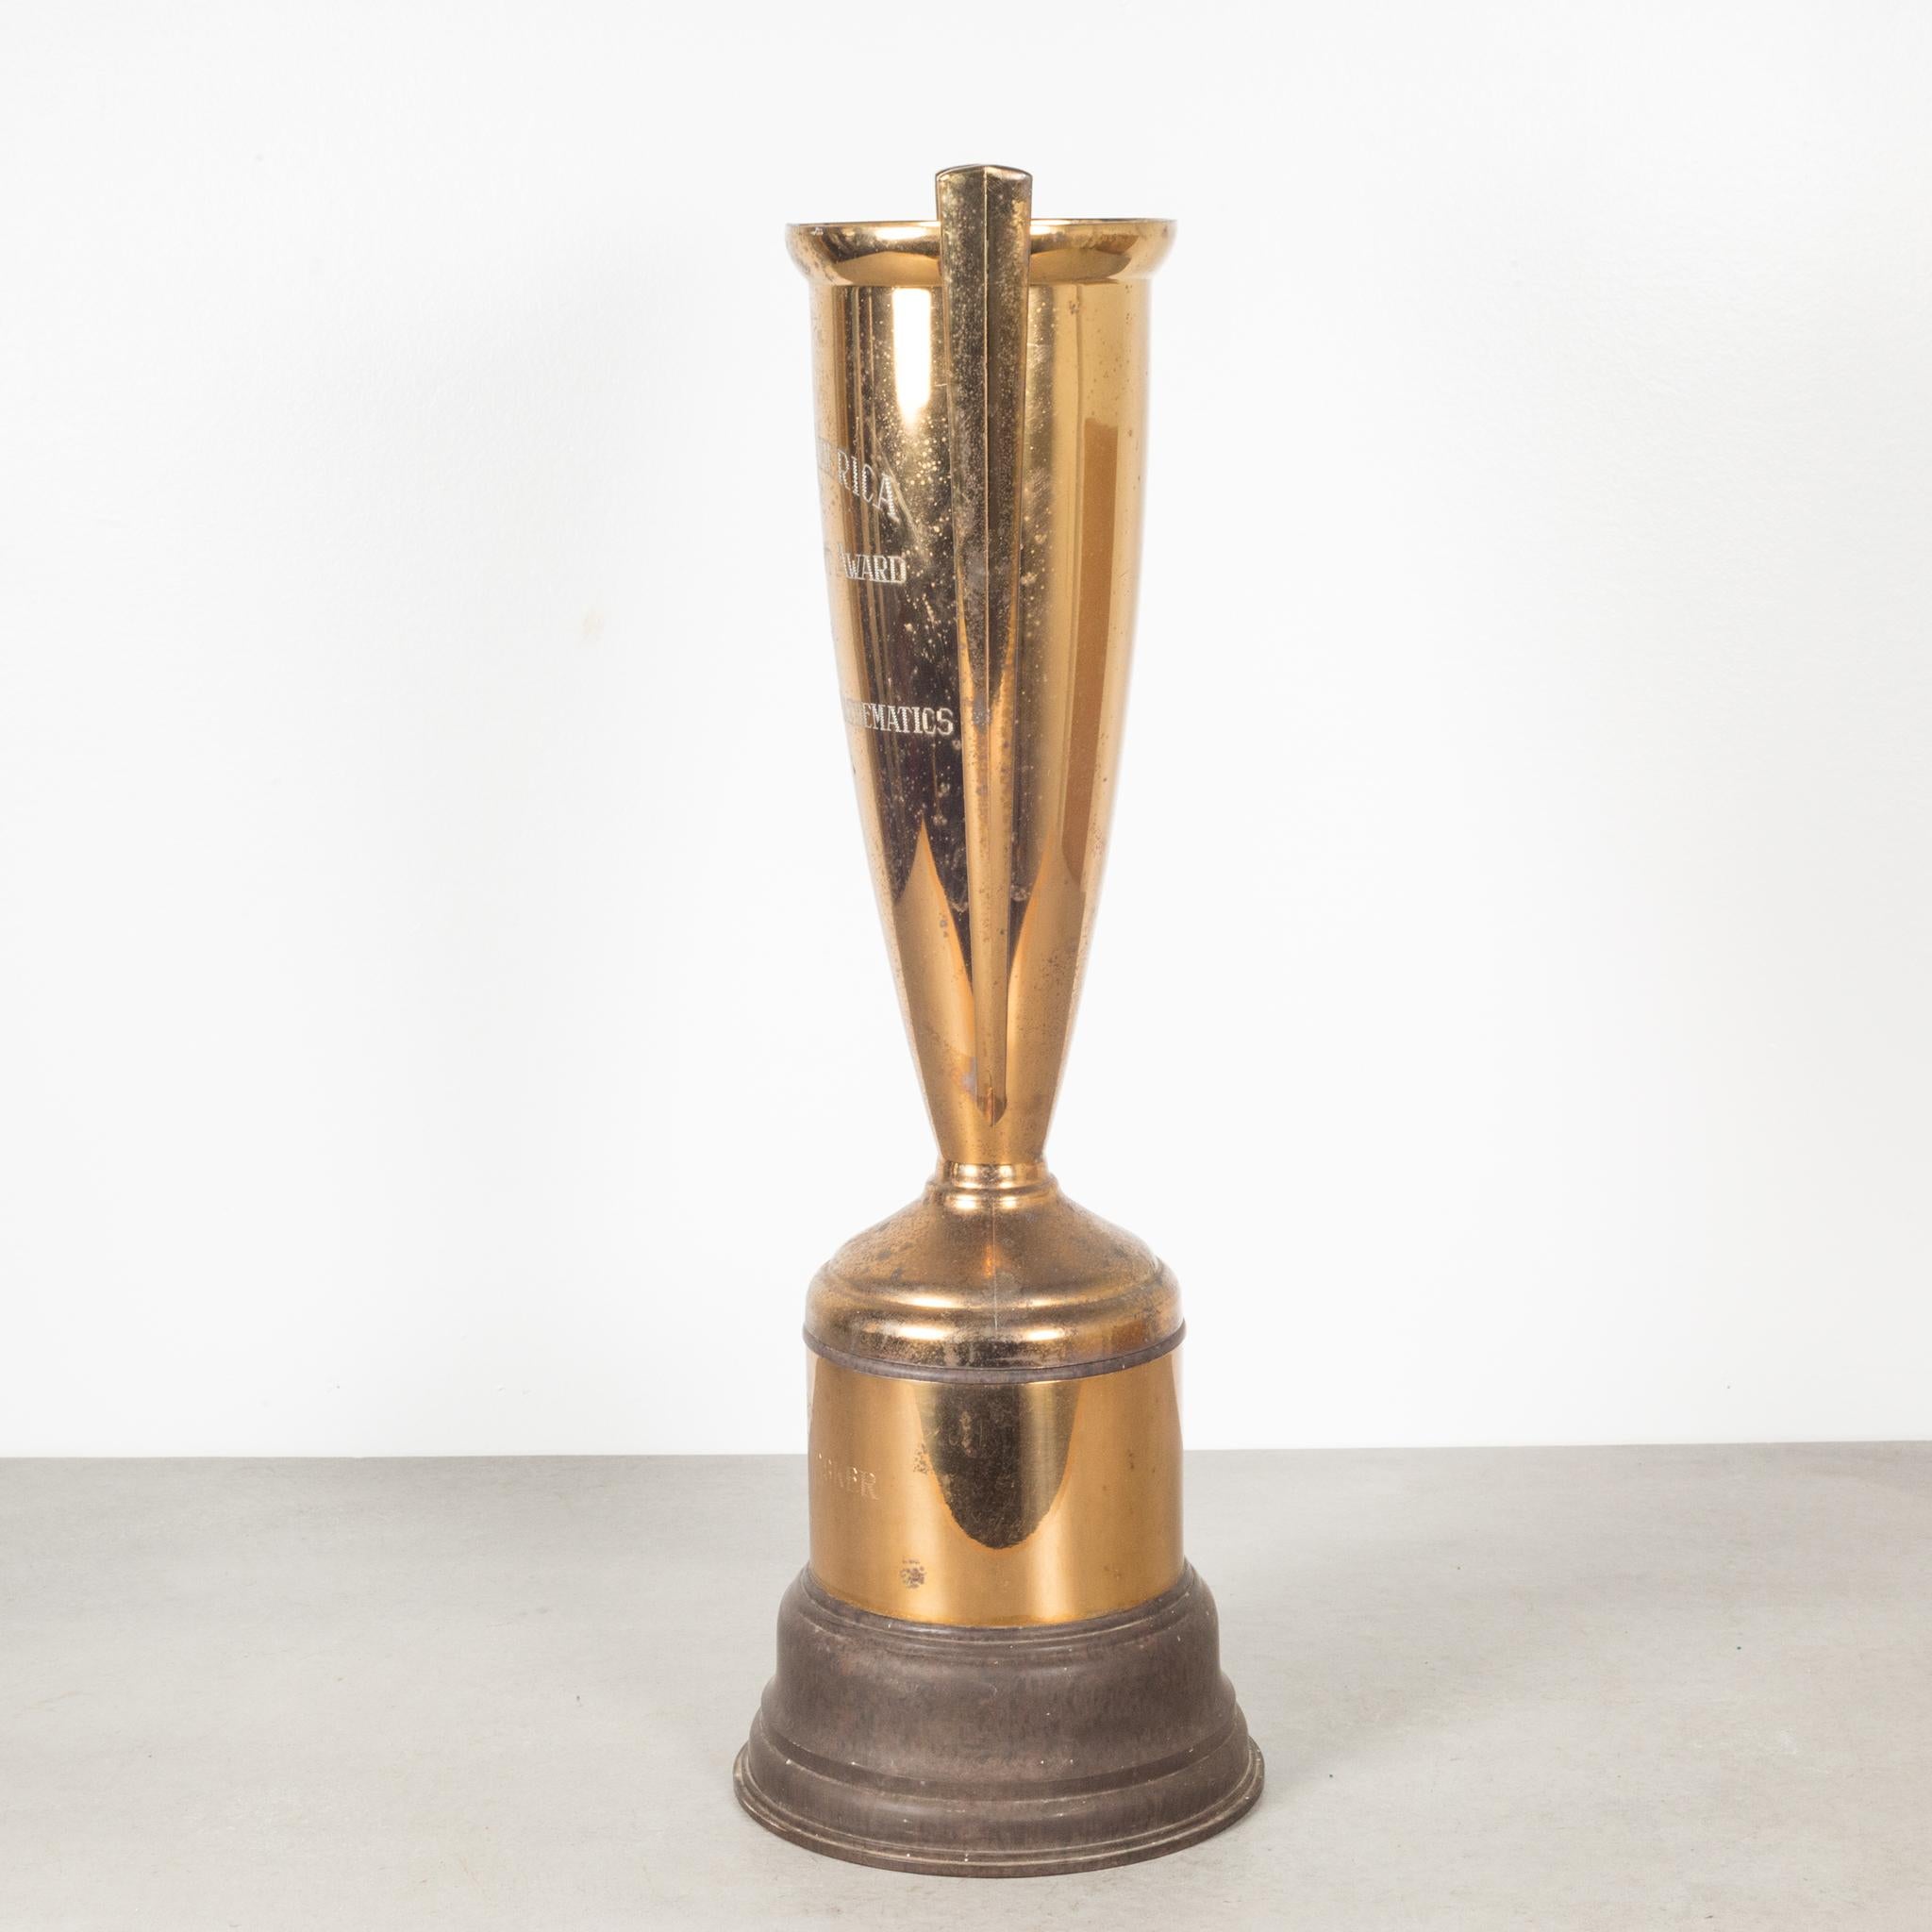 About

An original brass plated cup trophy with a Bakelite base. Engraved 